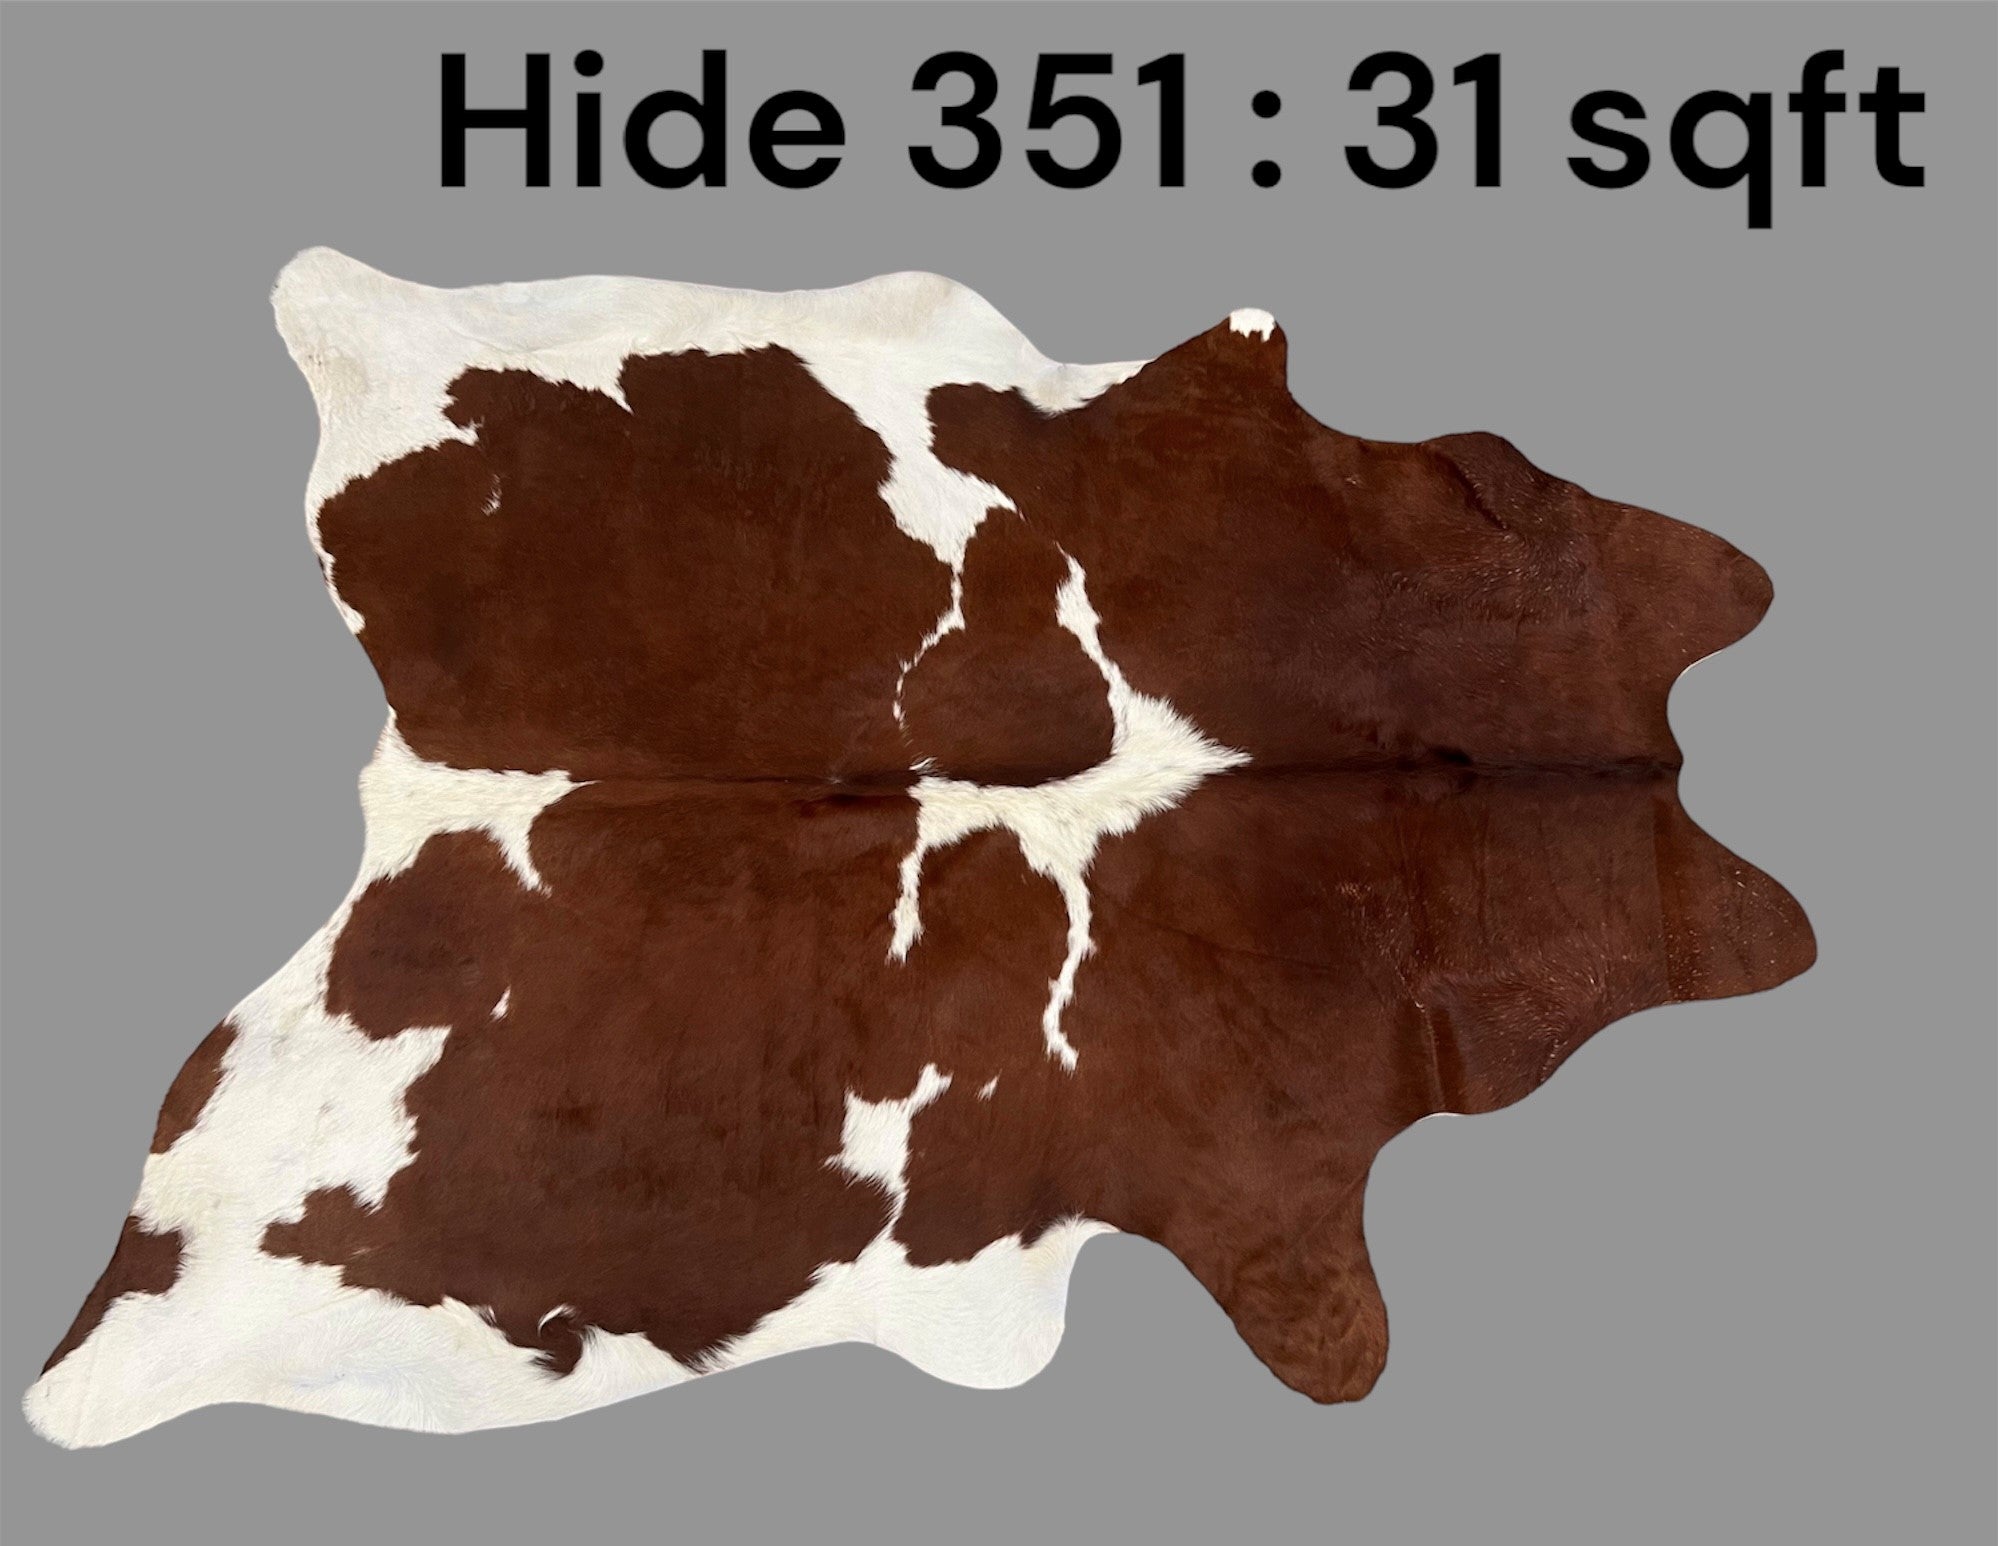 Natural Hair On Cow Hide : This Hide Is Perfect For Wall Hanging, Leather Rugs, Leather Upholstery & Leather Accessories. (Hide351)